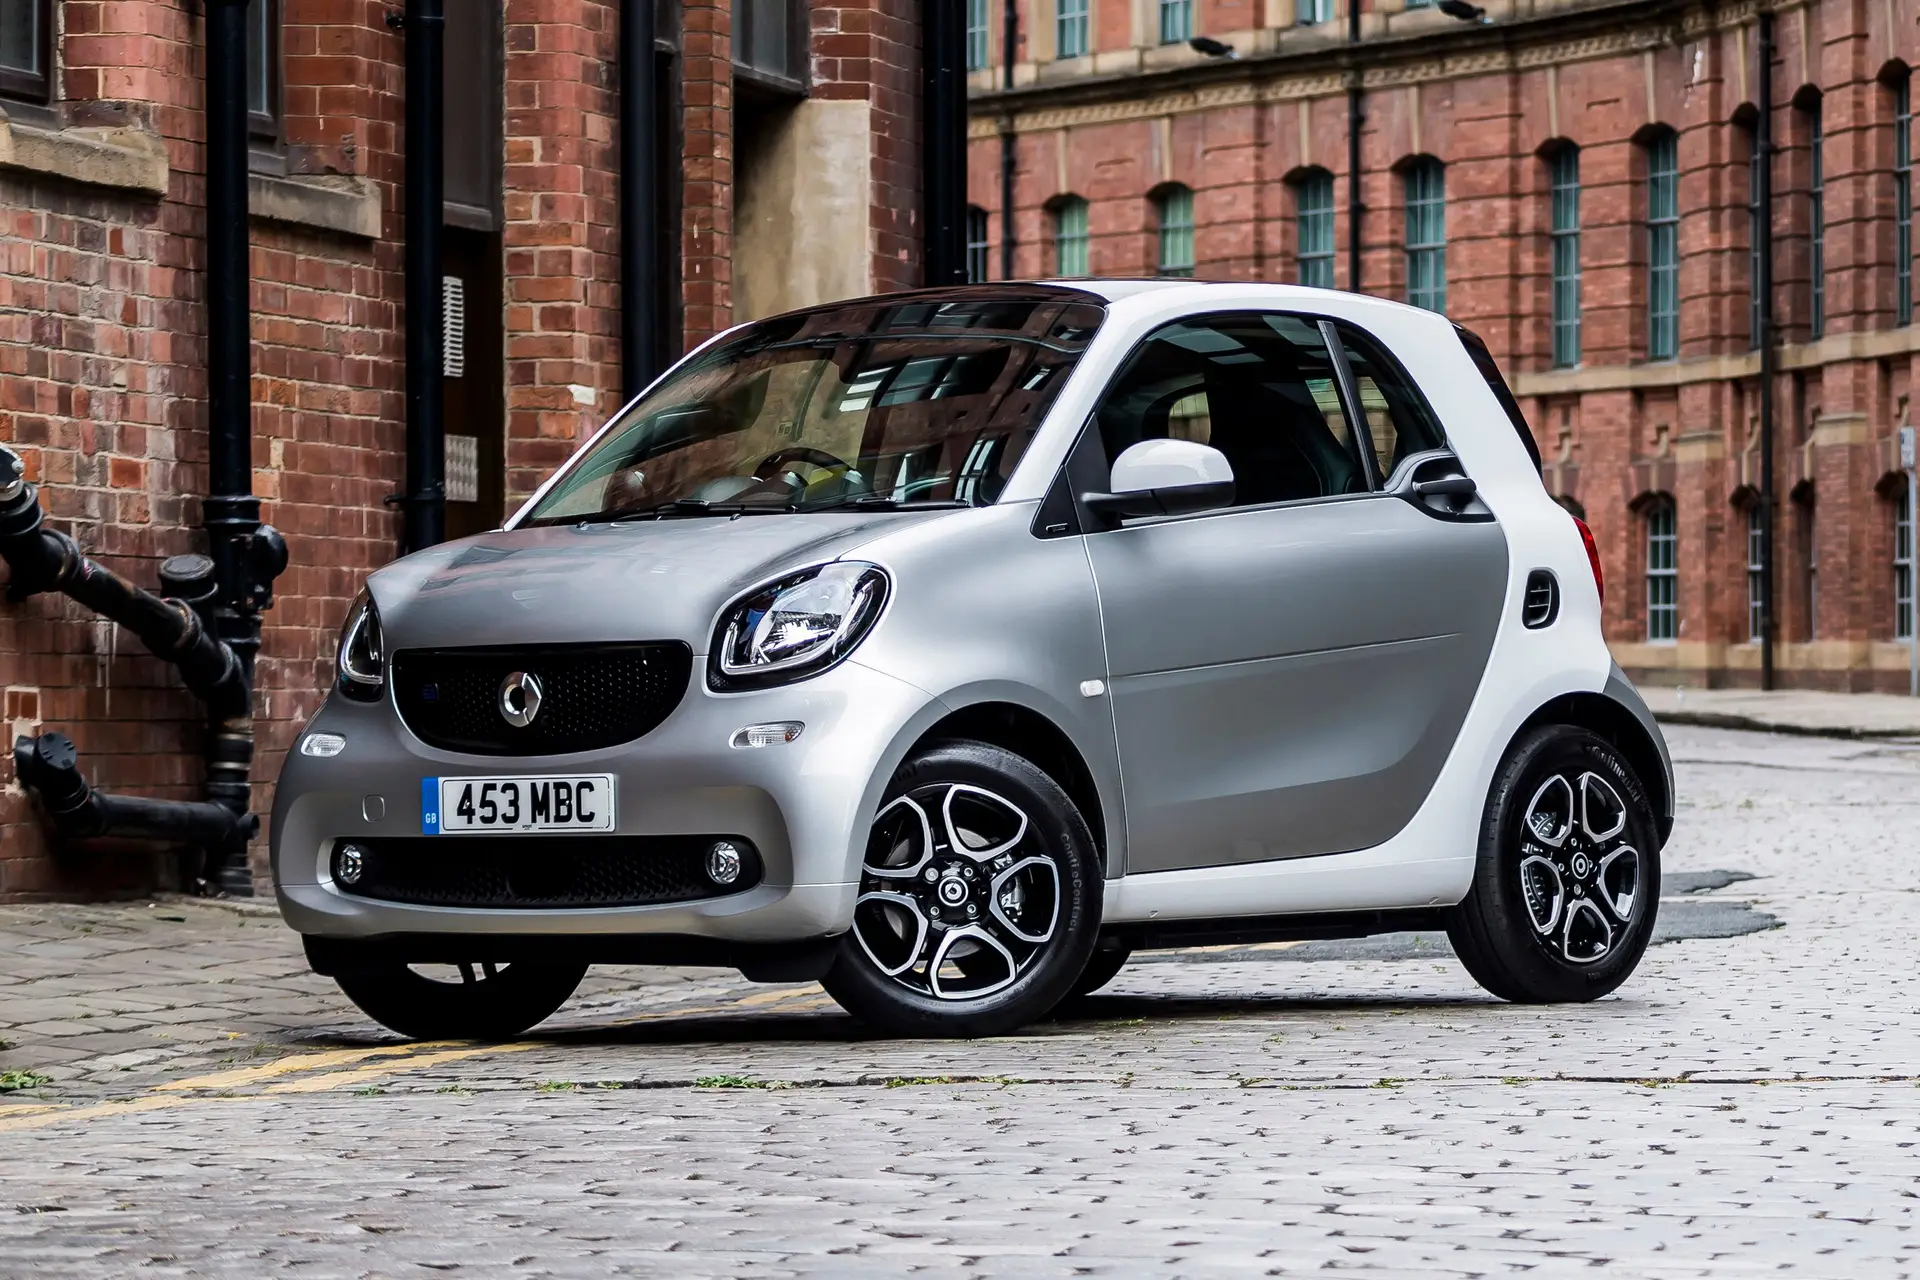 2014 smart fortwo : Latest Prices, Reviews, Specs, Photos and